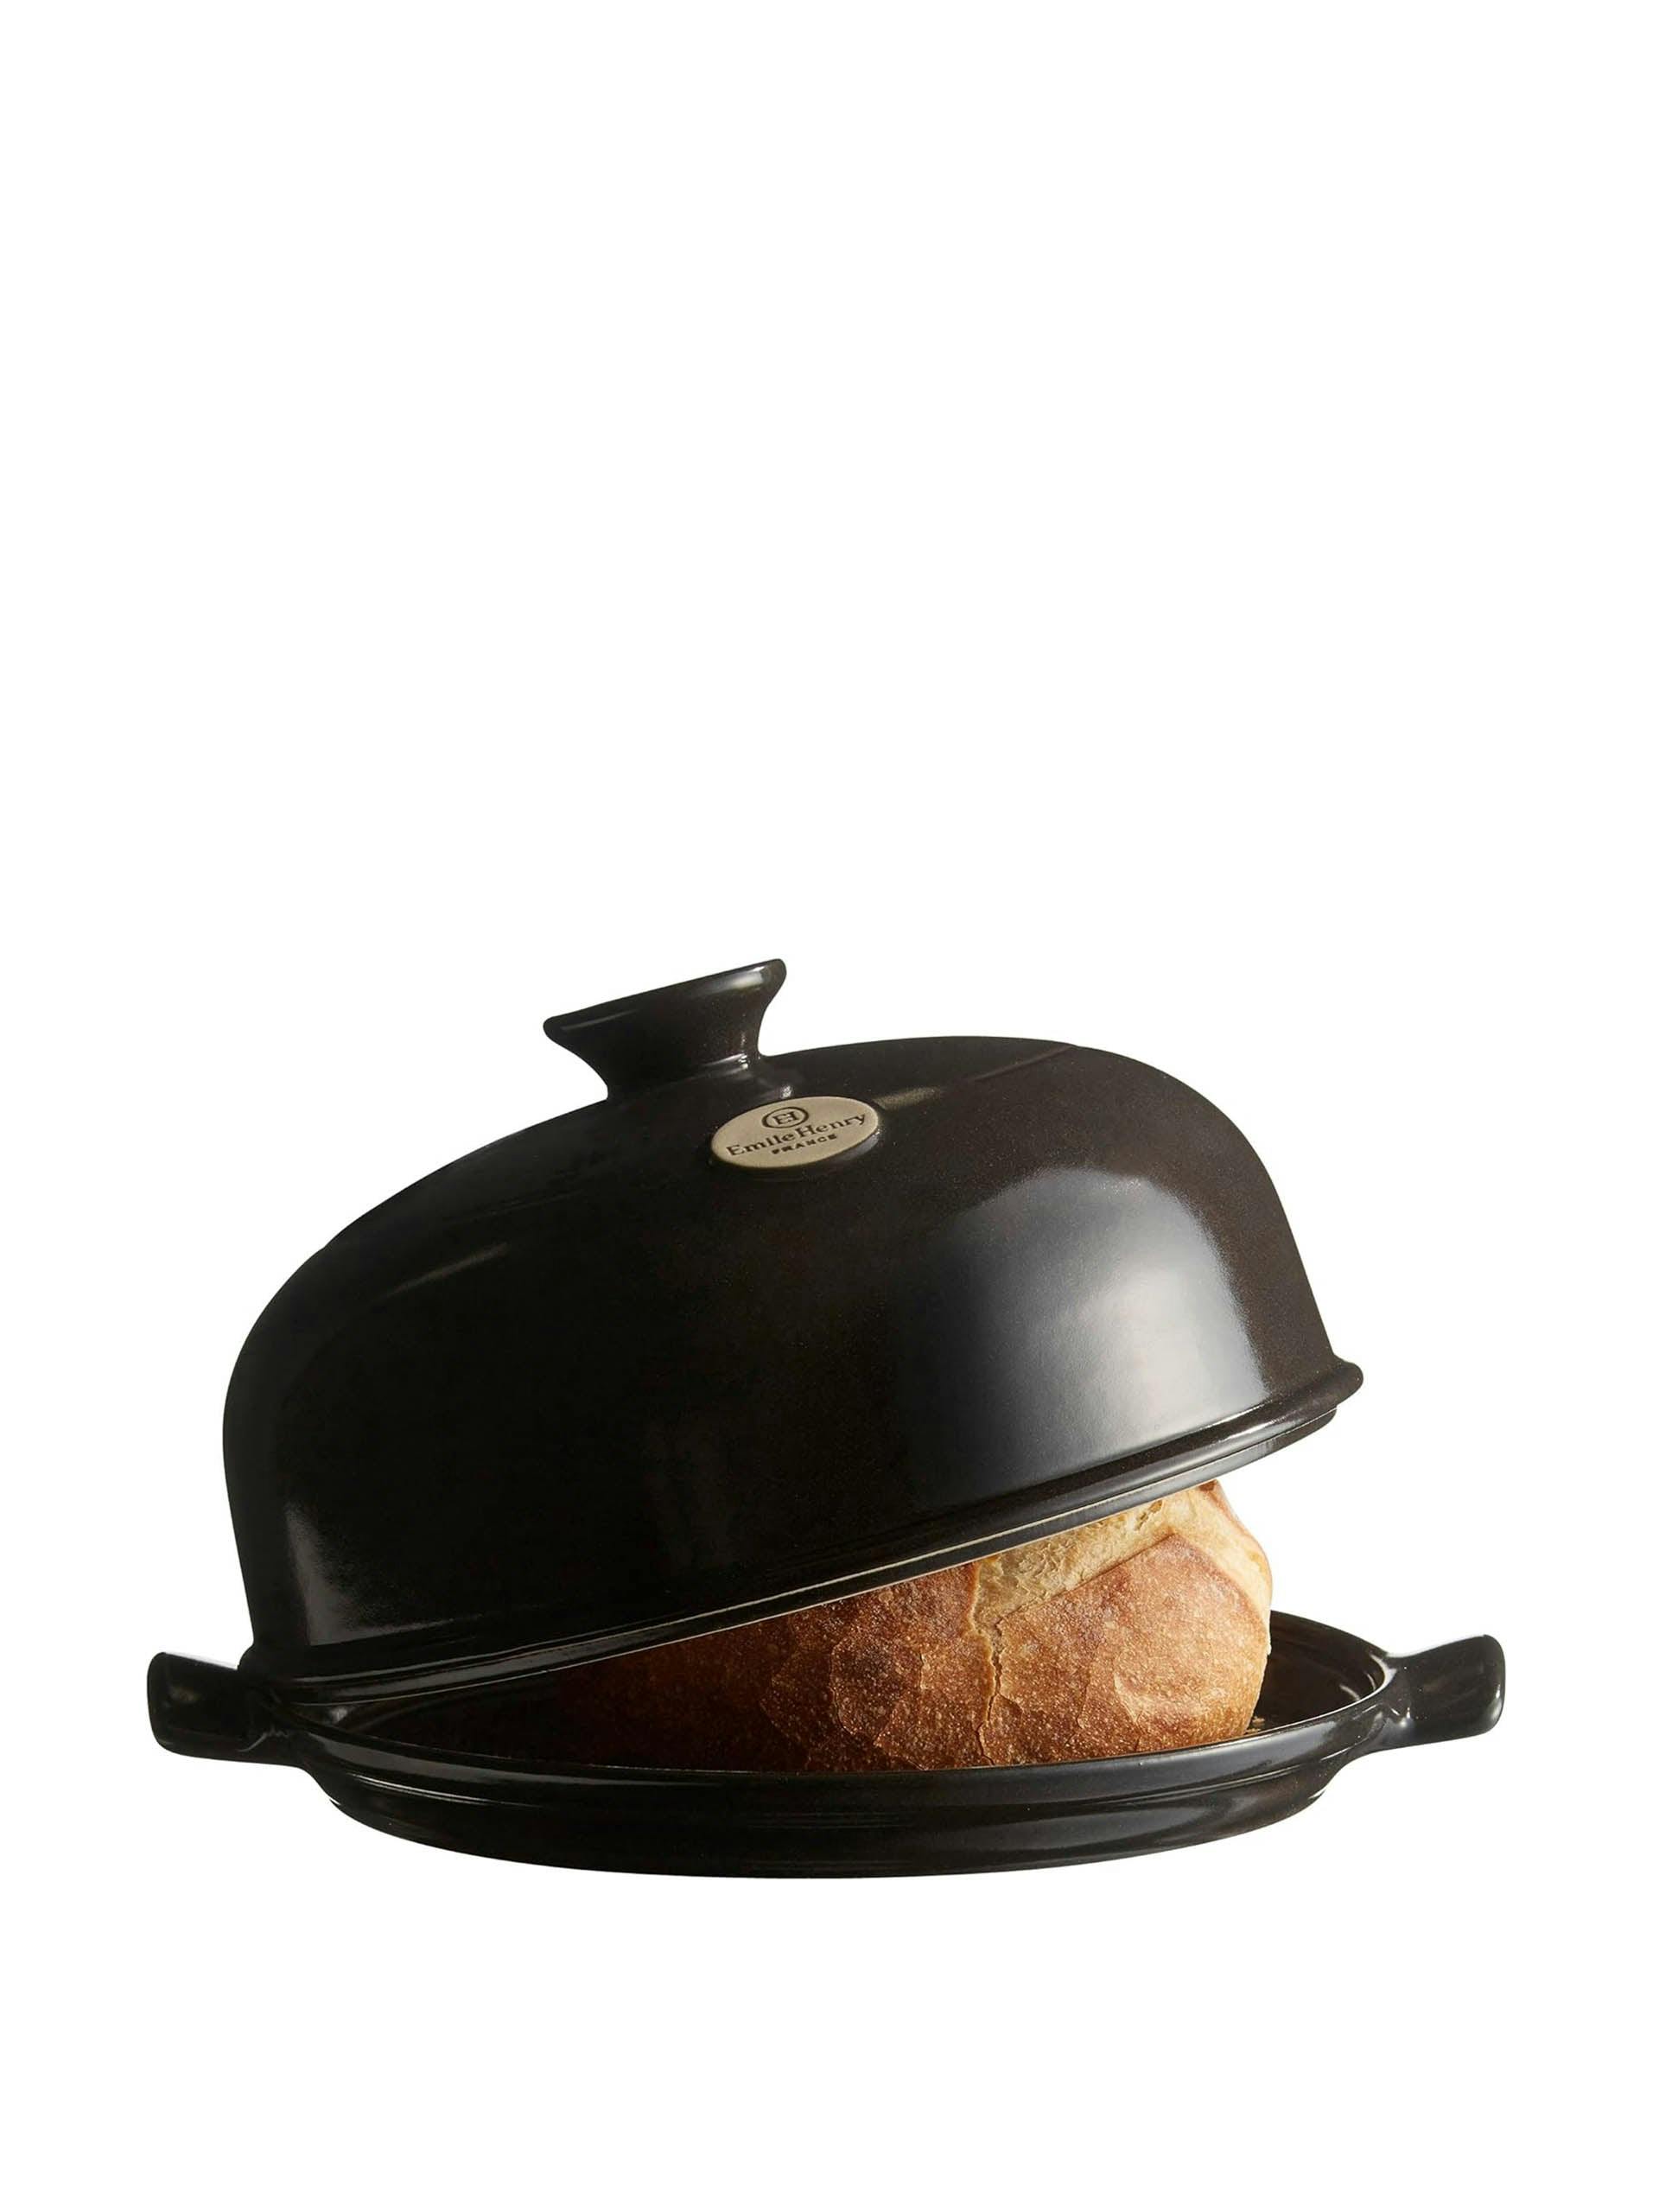 Emile henry charcoal bread cloche